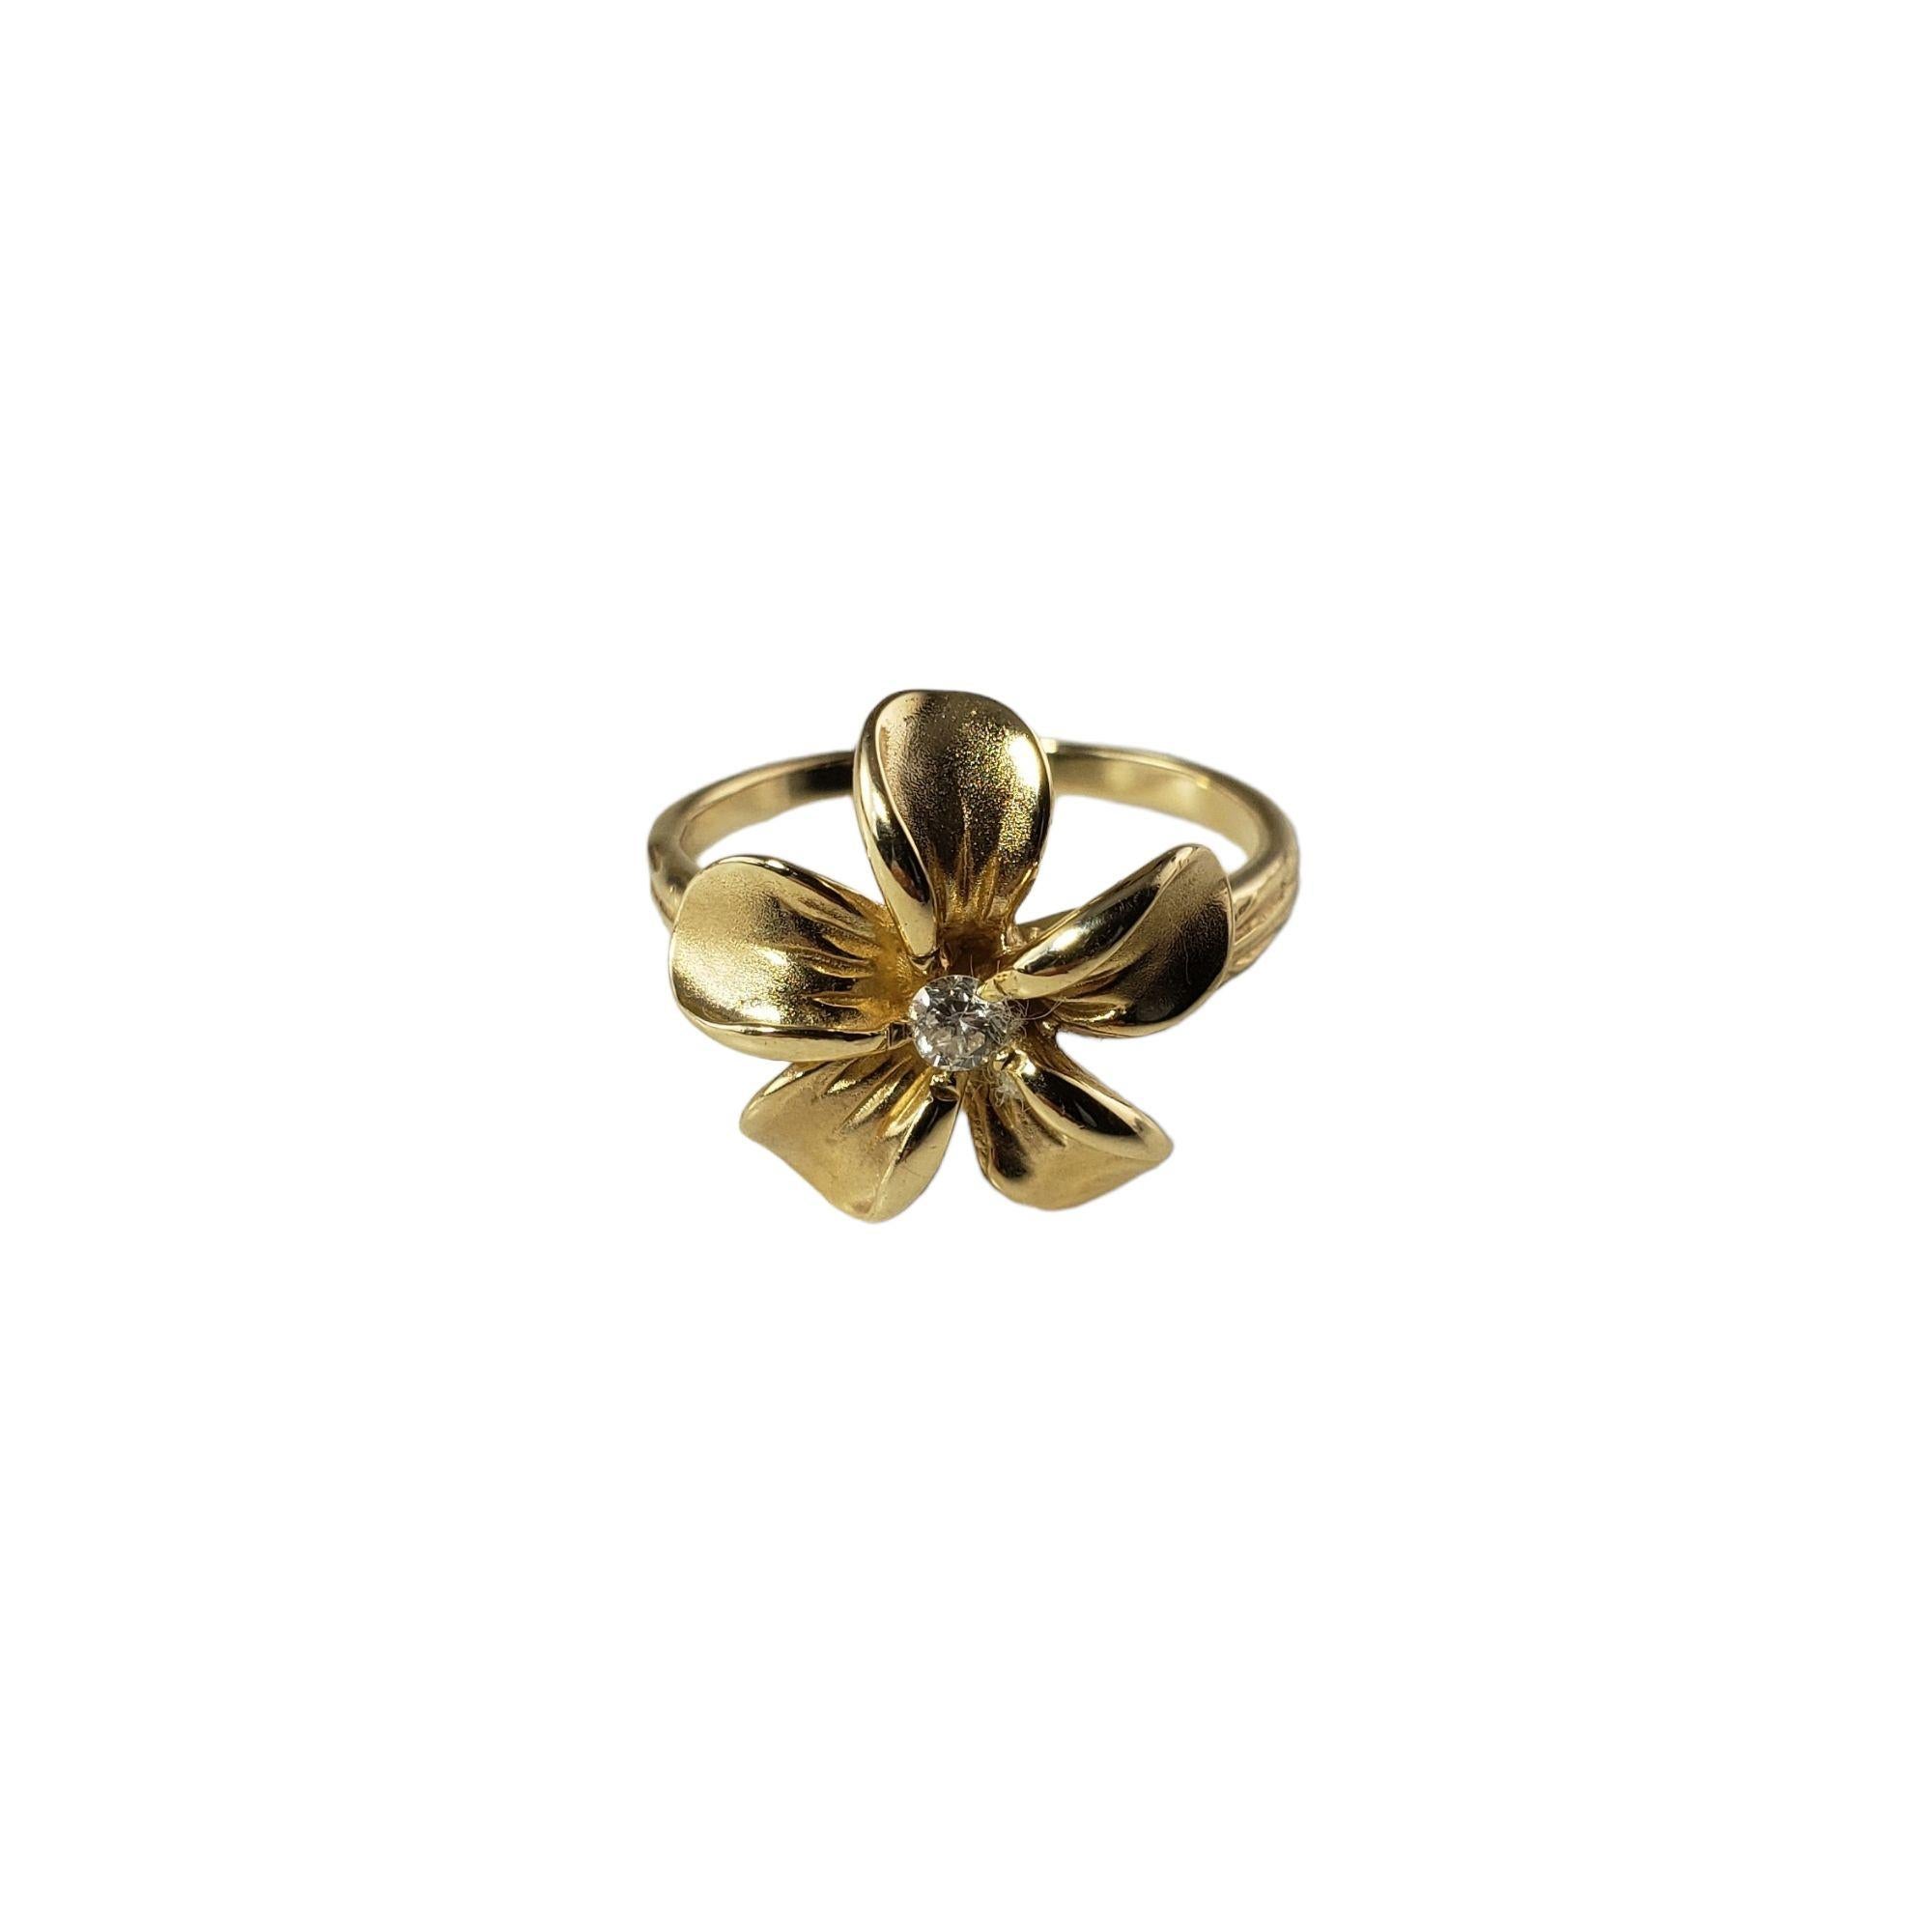 Vintage 14 Karat Yellow Gold and Diamond Flower Ring Size 5-

This lovely flower ring features one round brilliant cut diamond set in beautifully detailed 14K yellow gold.  Width:  14 mm.

Shank: 1.5 mm.

Approximate  diamond weight:  .05